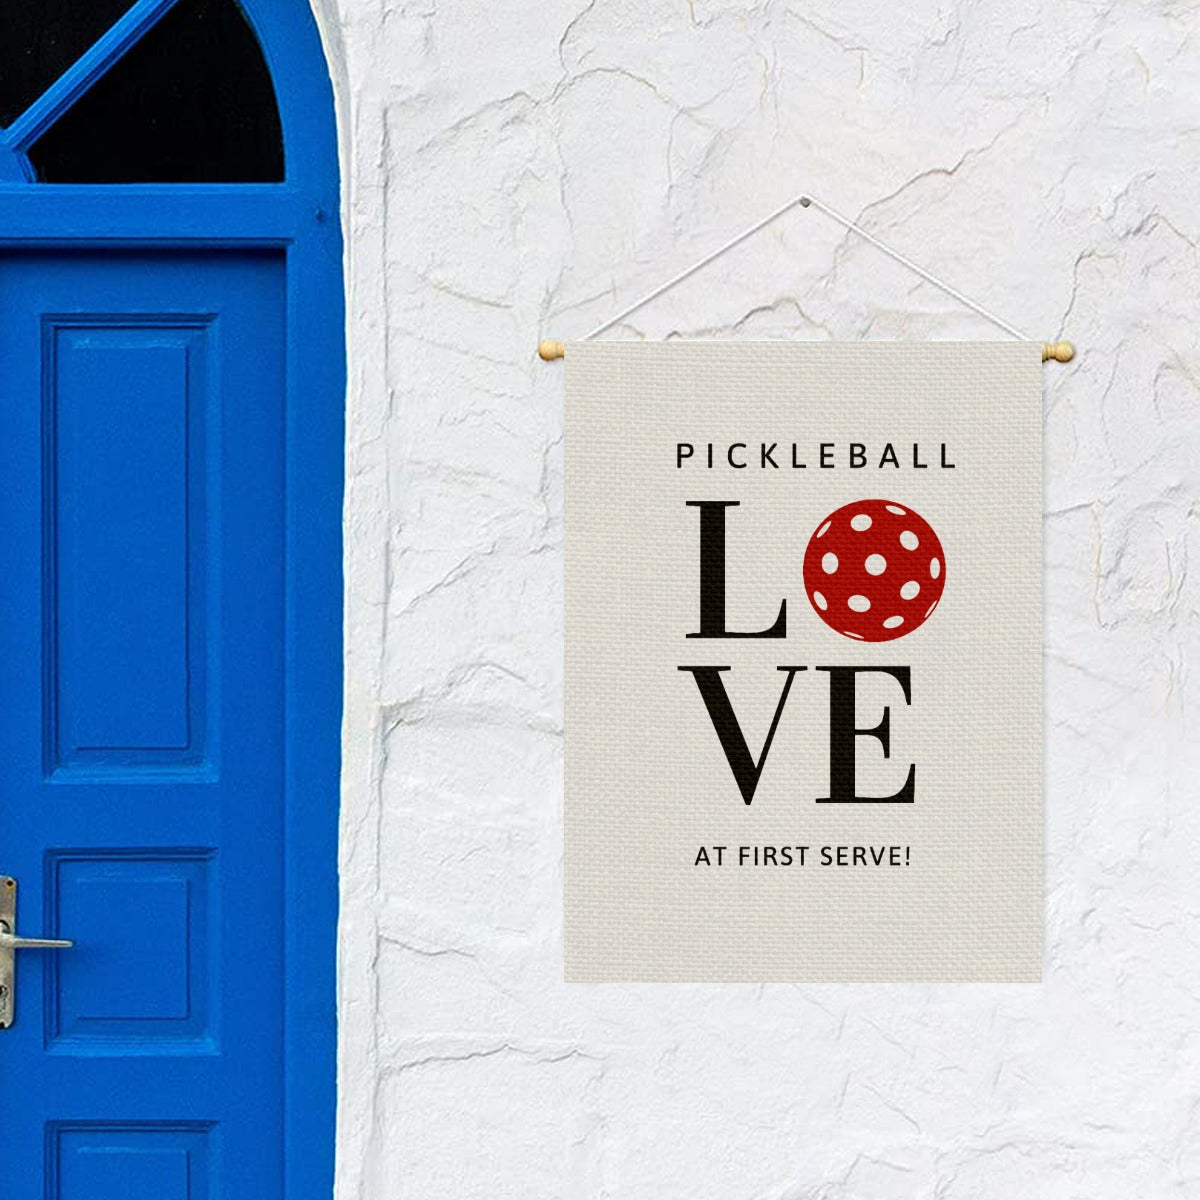 Pickleball Love at First Serve Garden Flag by Dizzy Pickle